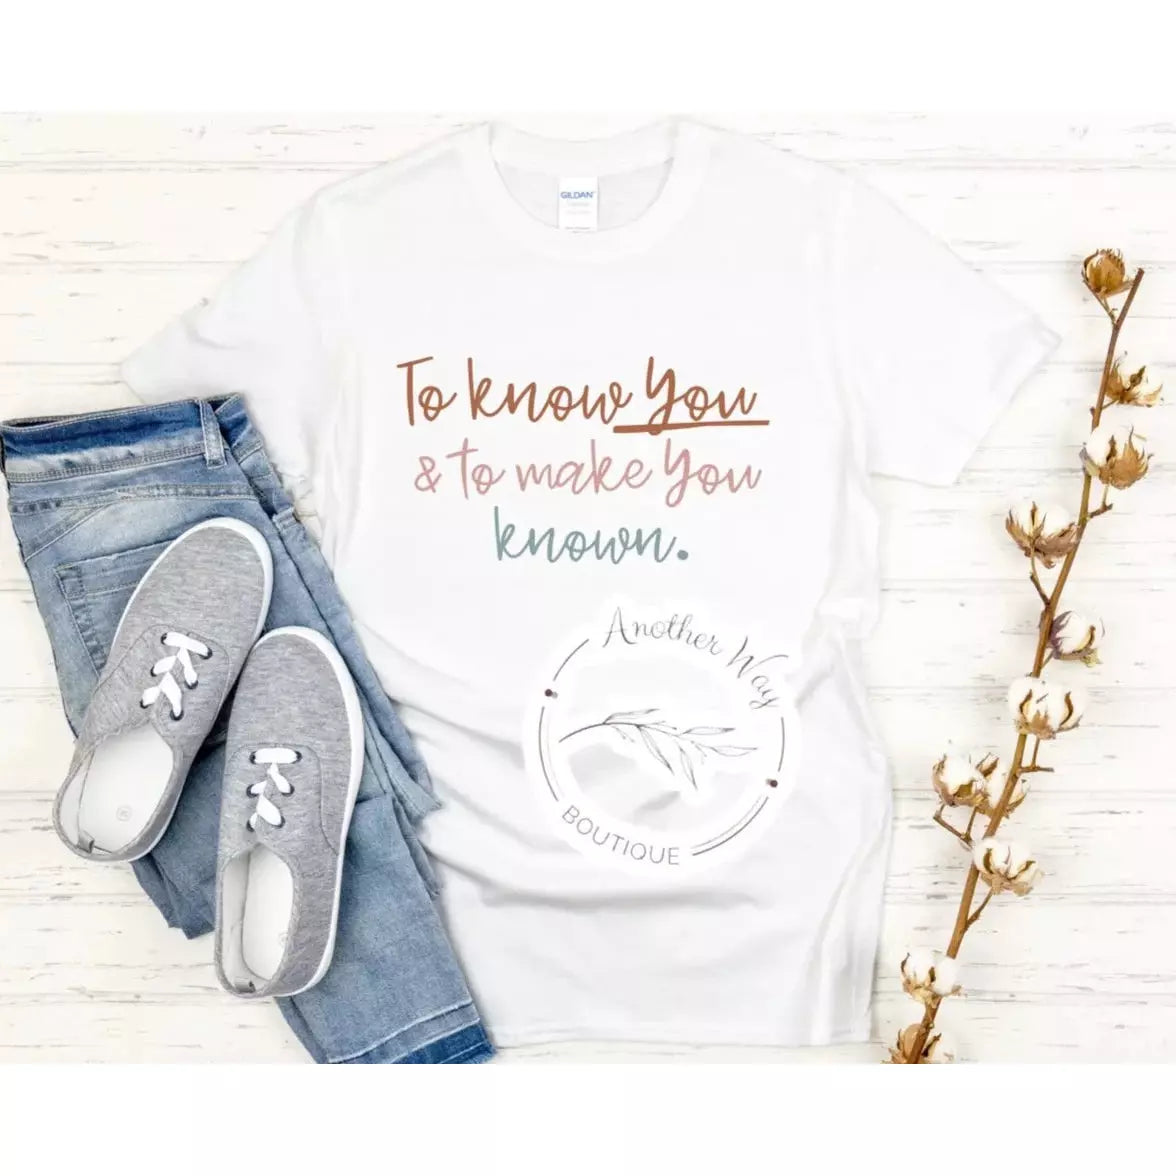 "To Know You & To Make You Known" - Another Way Boutique